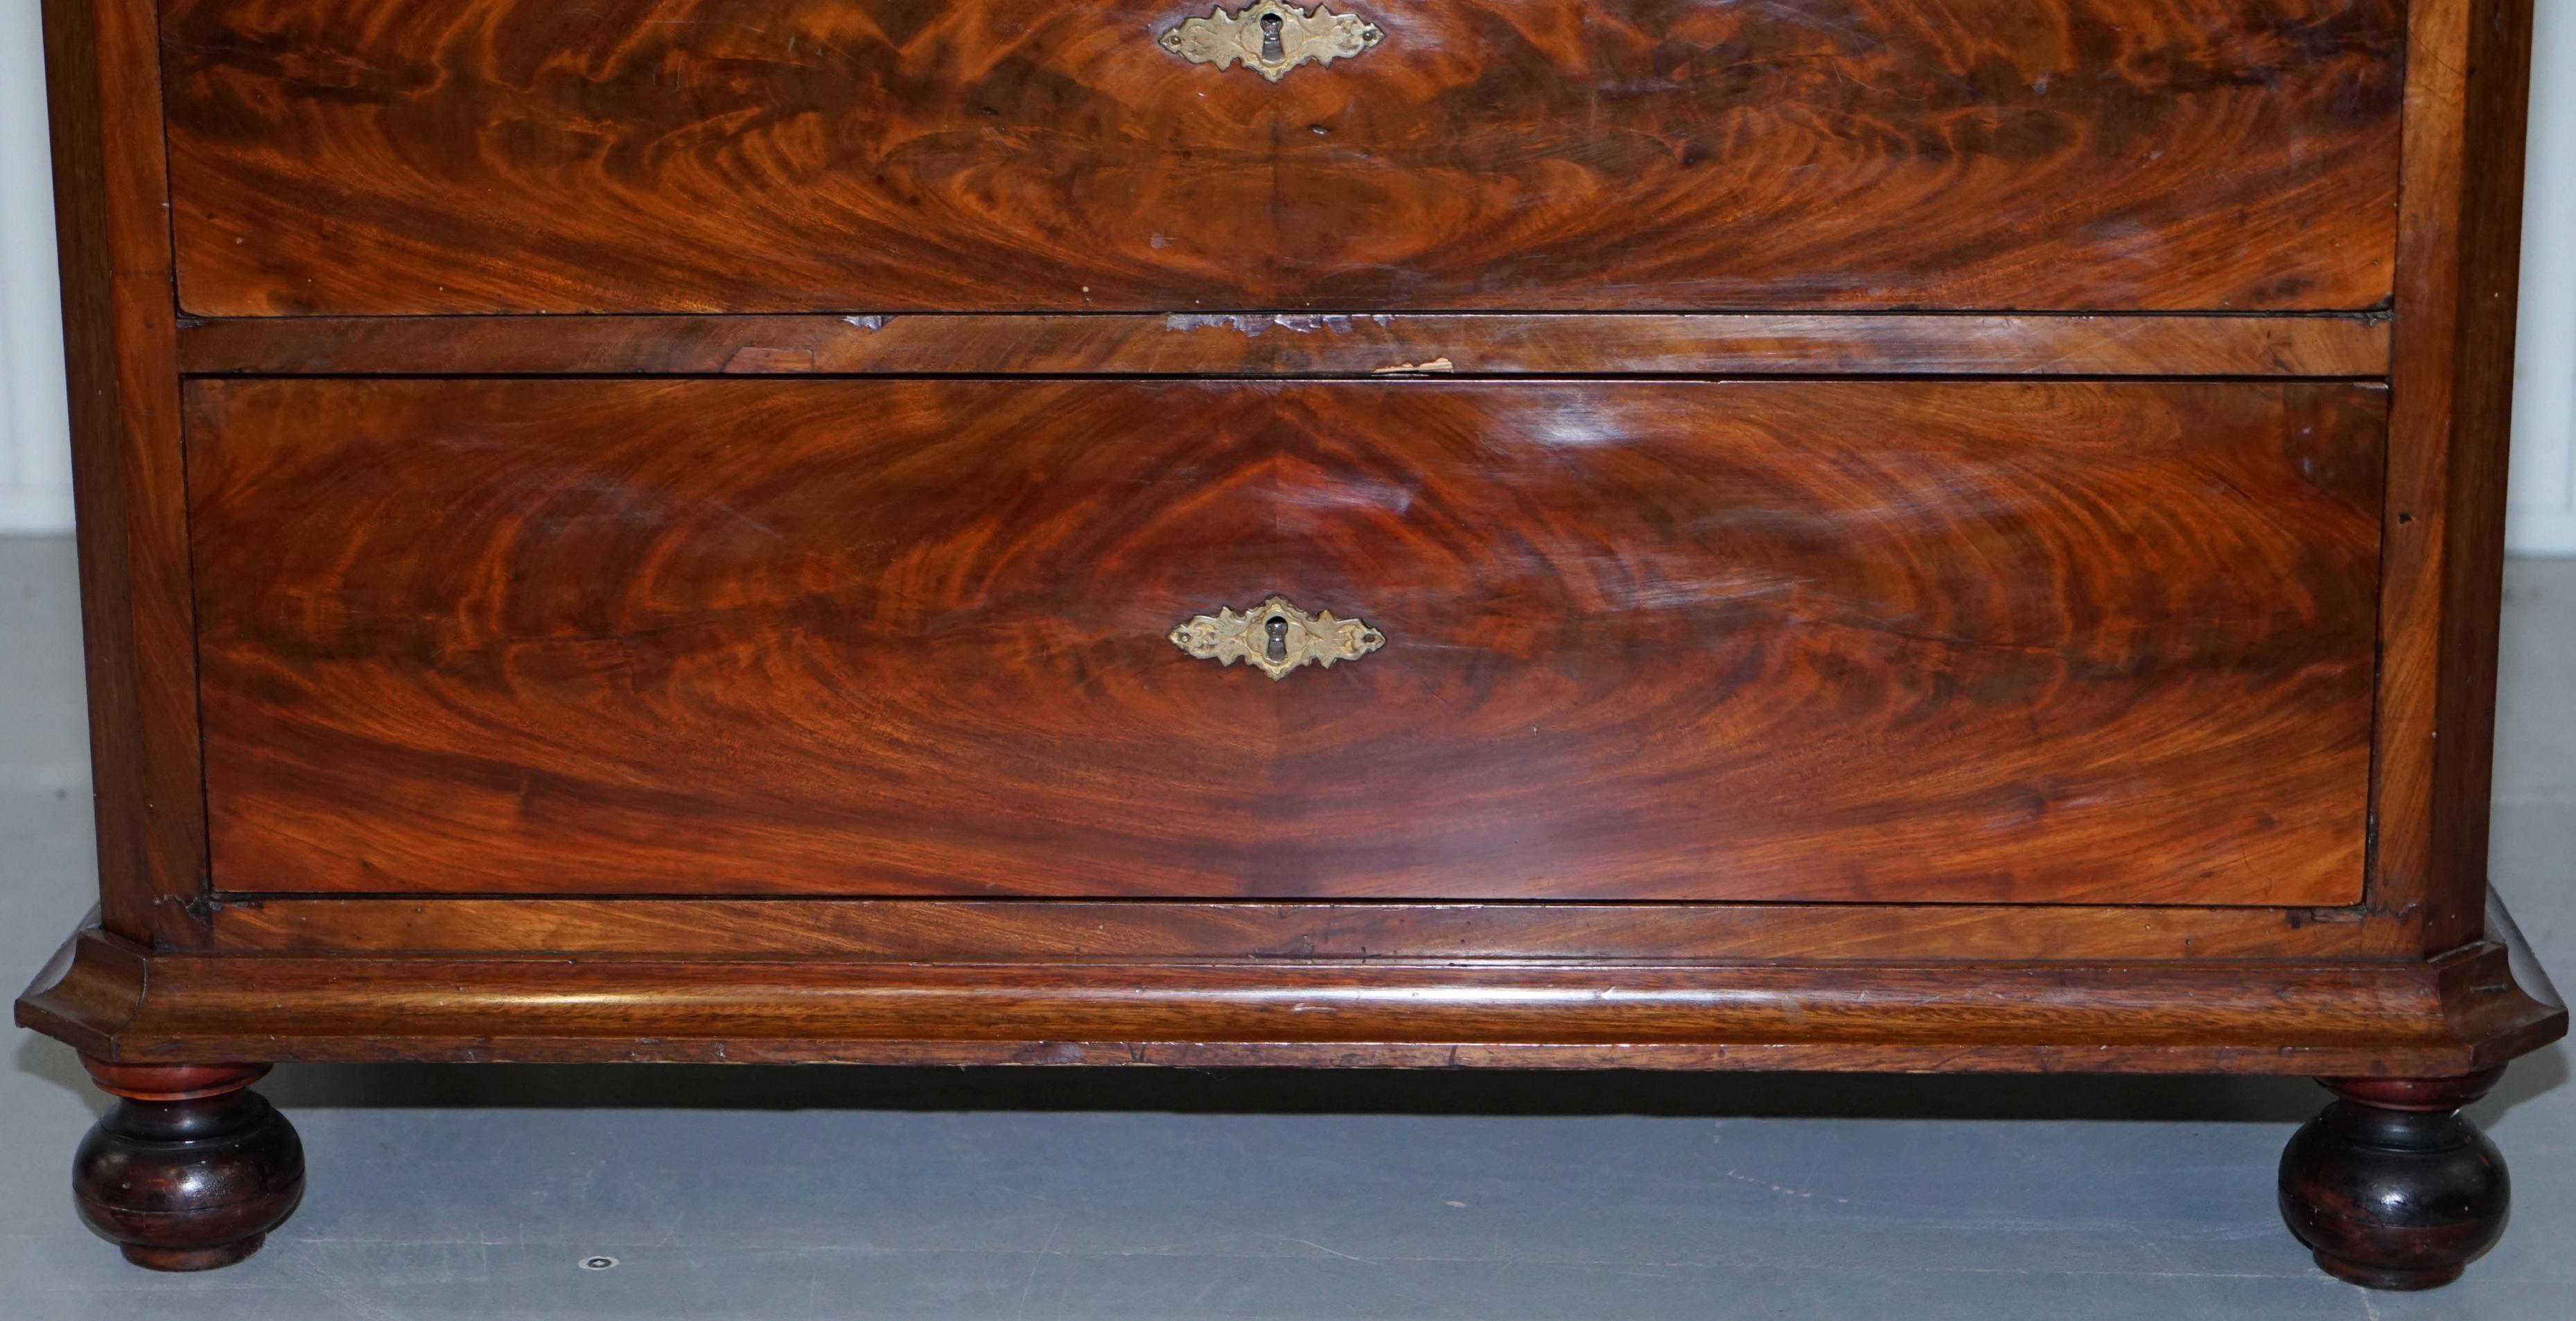 Stunning Biedermeier Flamed Mahogany Small Chest of Drawers Rare Find circa 1820 6